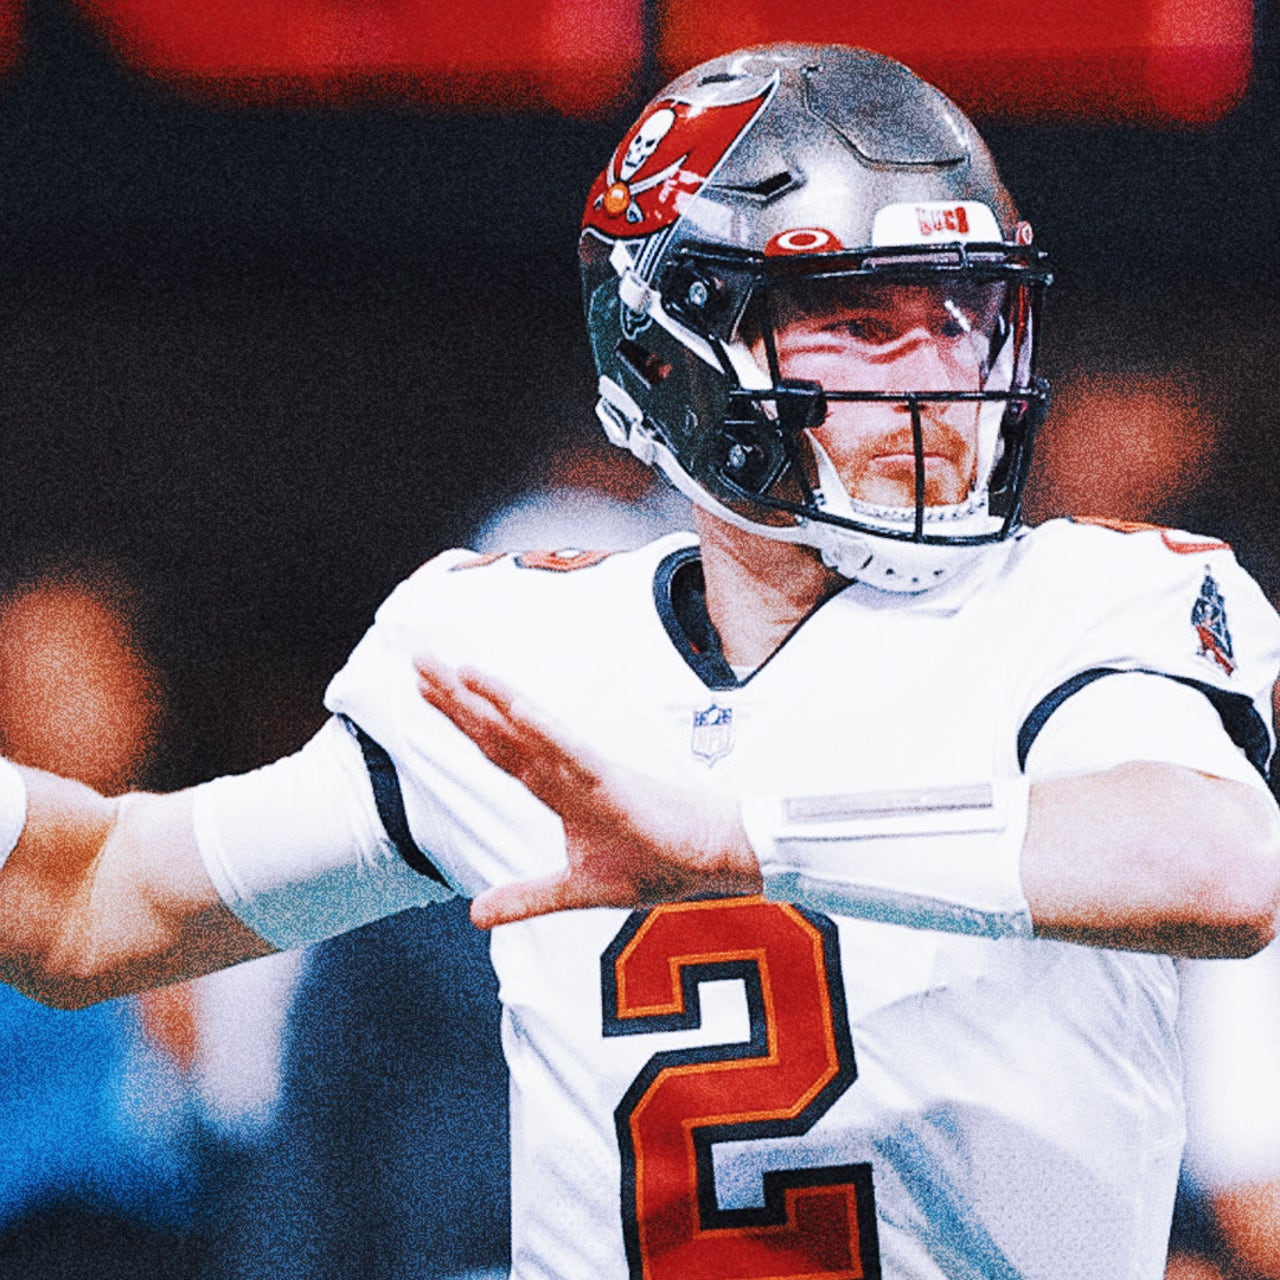 Report: Kyle Trask 'likely' to start Week 1 for the Bucs - Bucs Nation